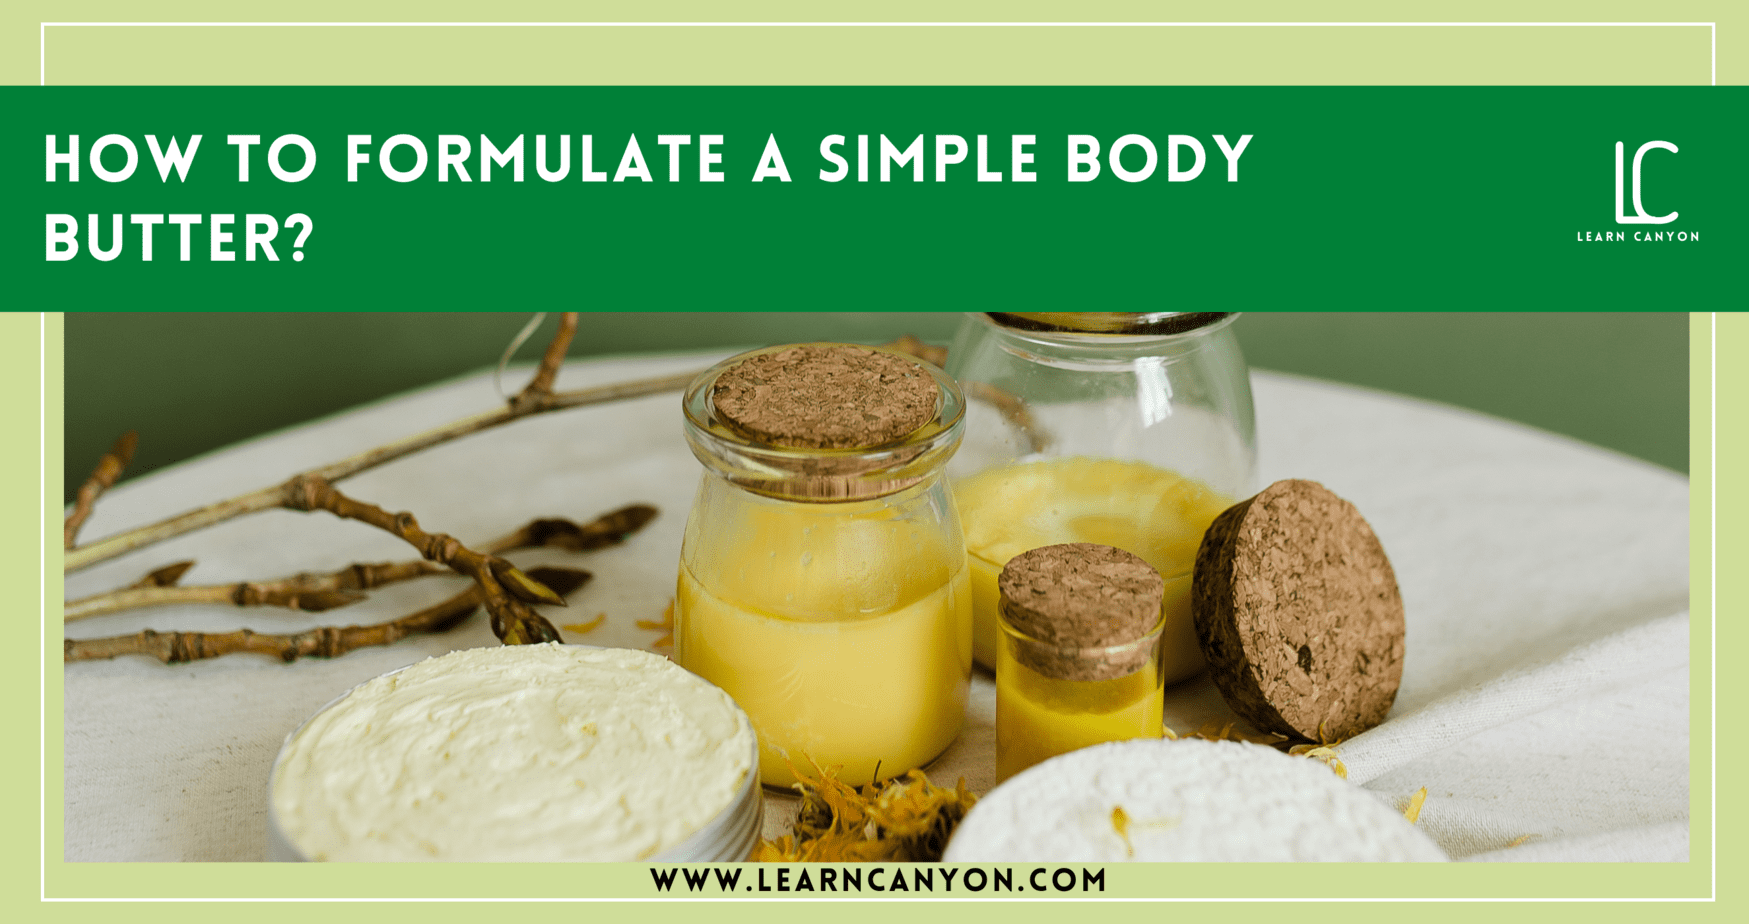 https://learncanyon.com/wp-content/uploads/2022/04/How-to-formulate-a-Simple-Body-Butter.png